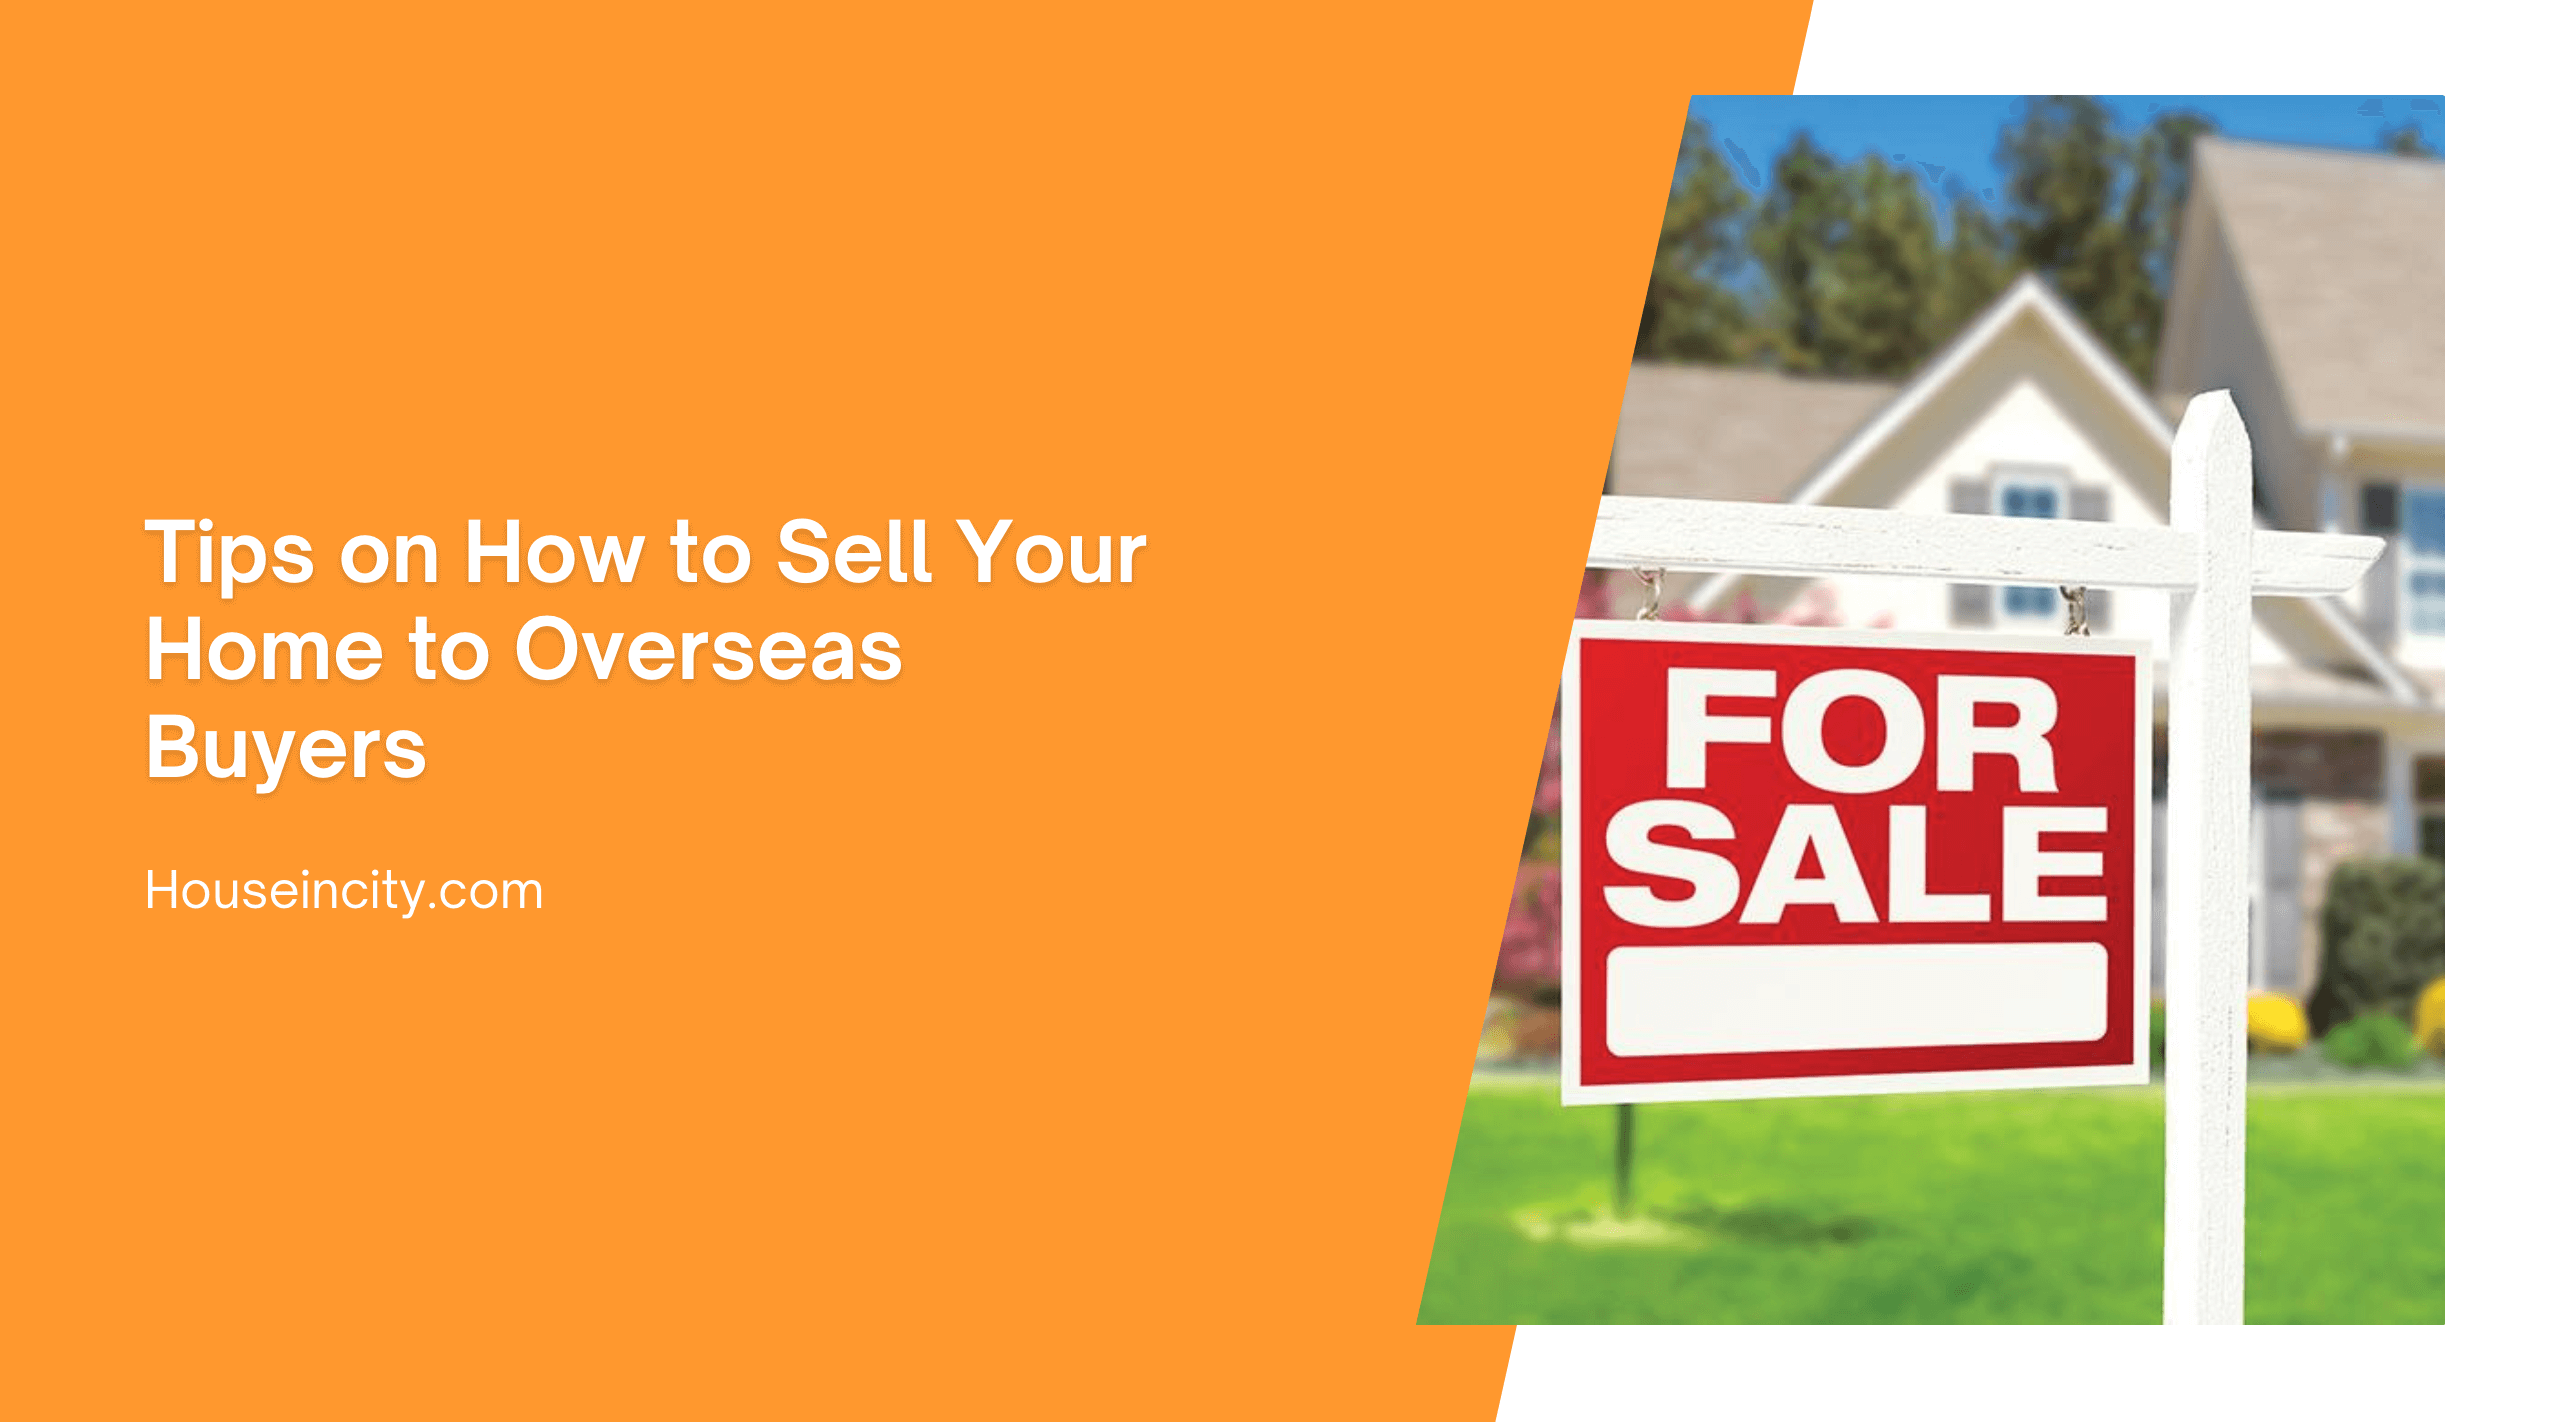 Tips on How to Sell Your Home to Overseas Buyers